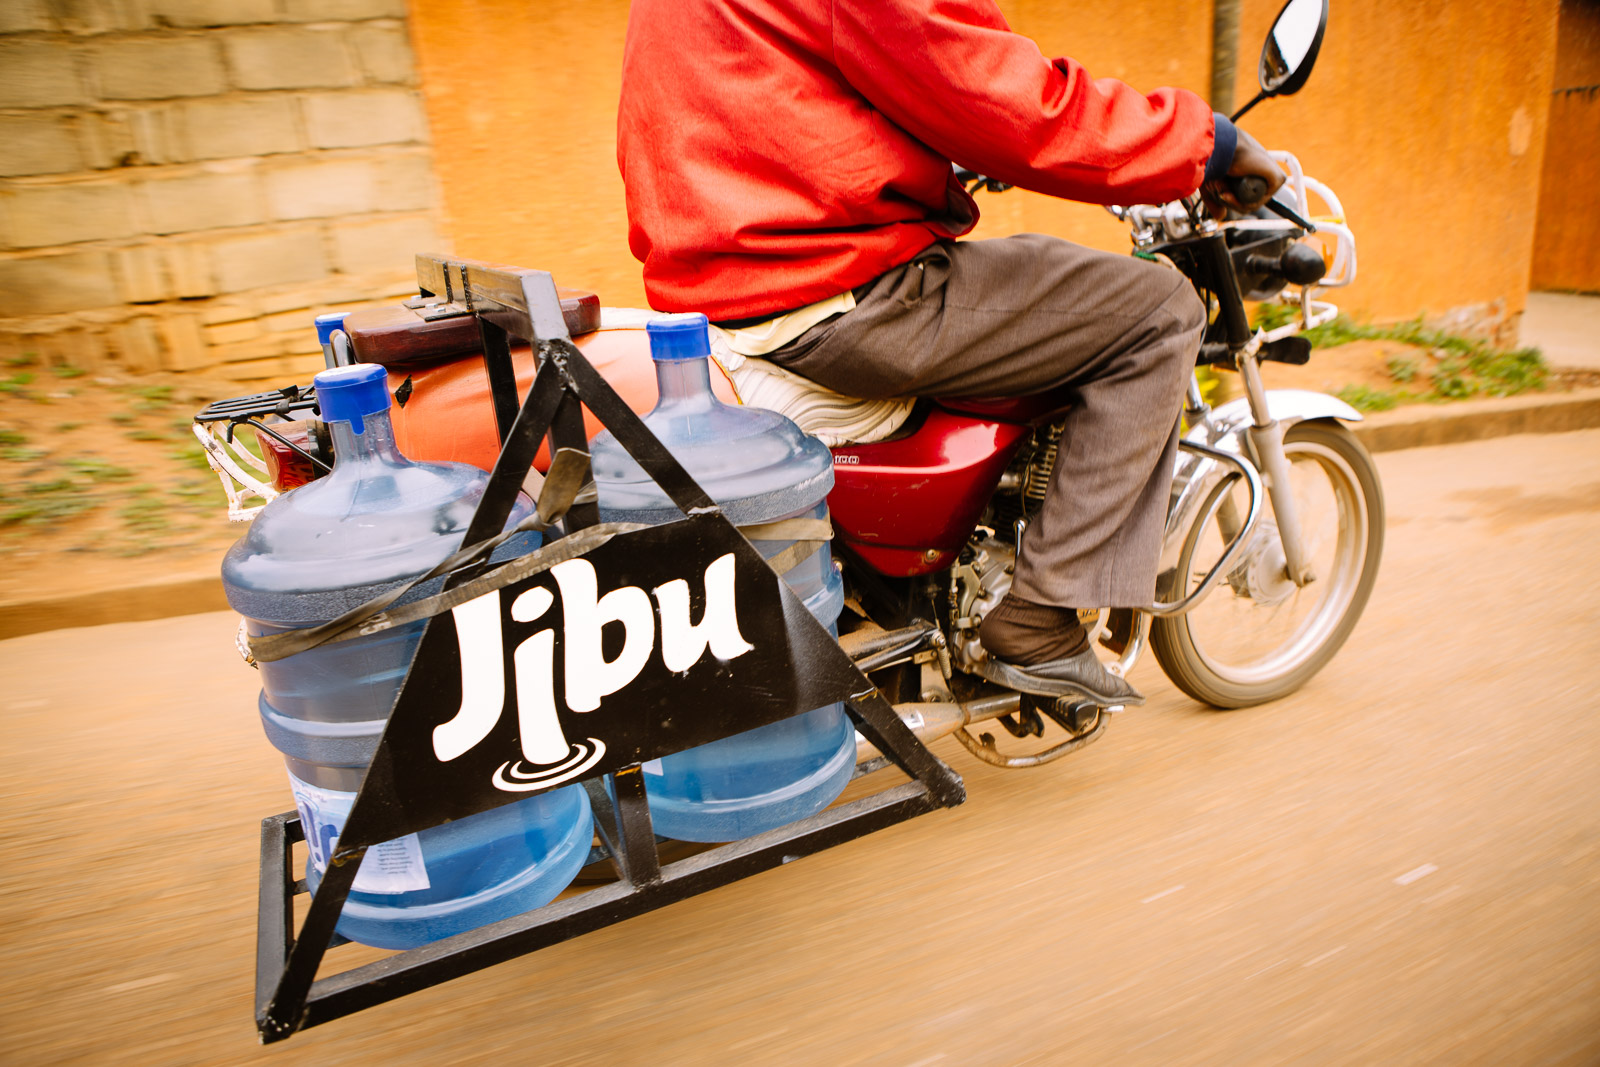 Jibu: Changing the Way the World Gets Clean Water